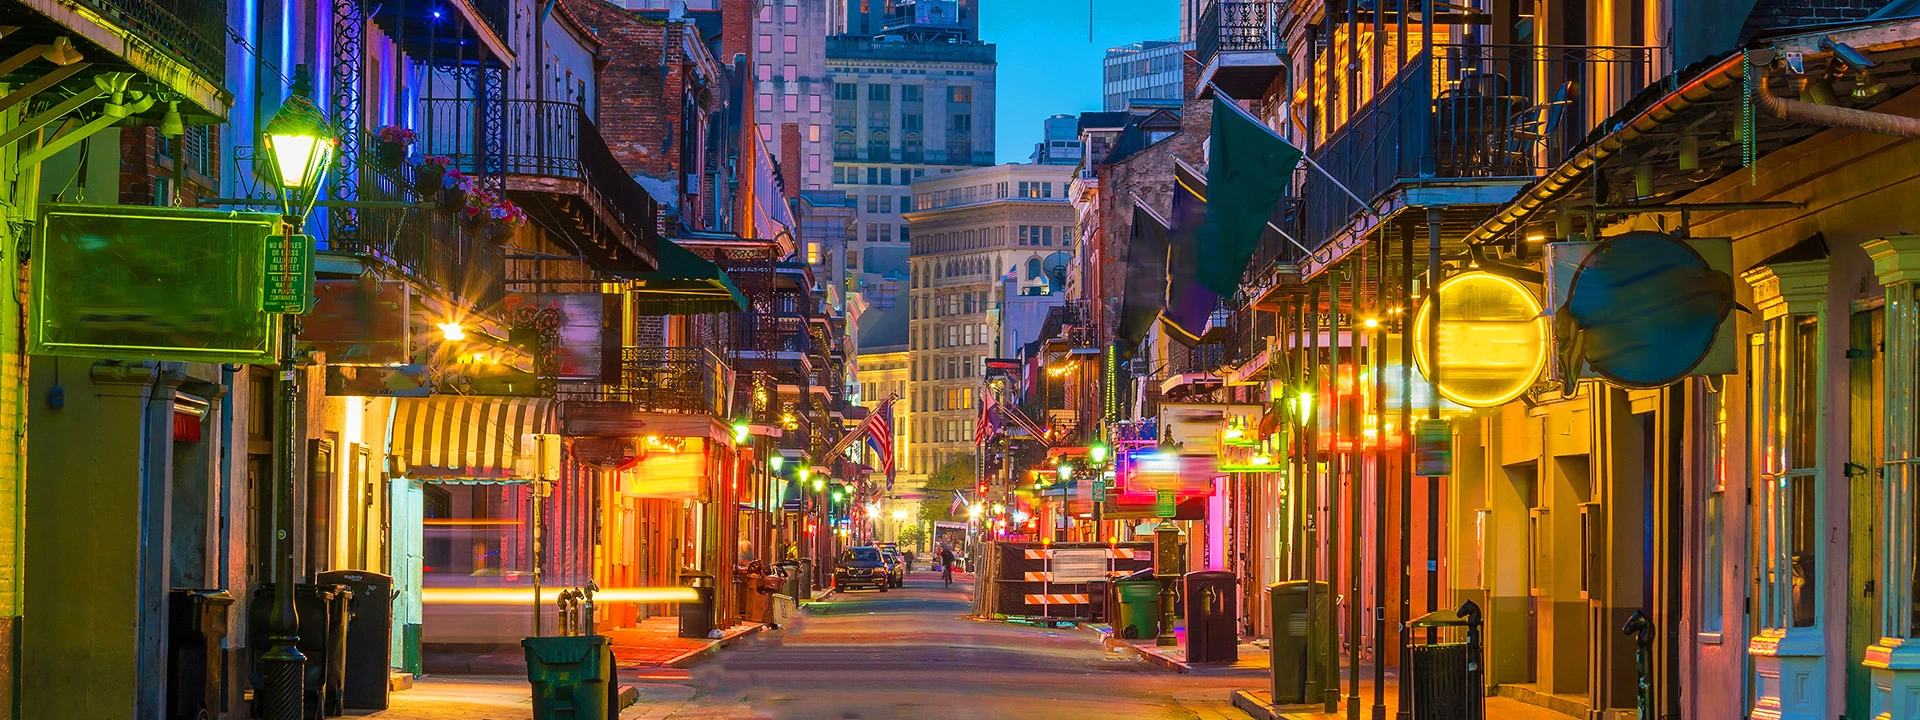 New Orleans at night on a North America cruise